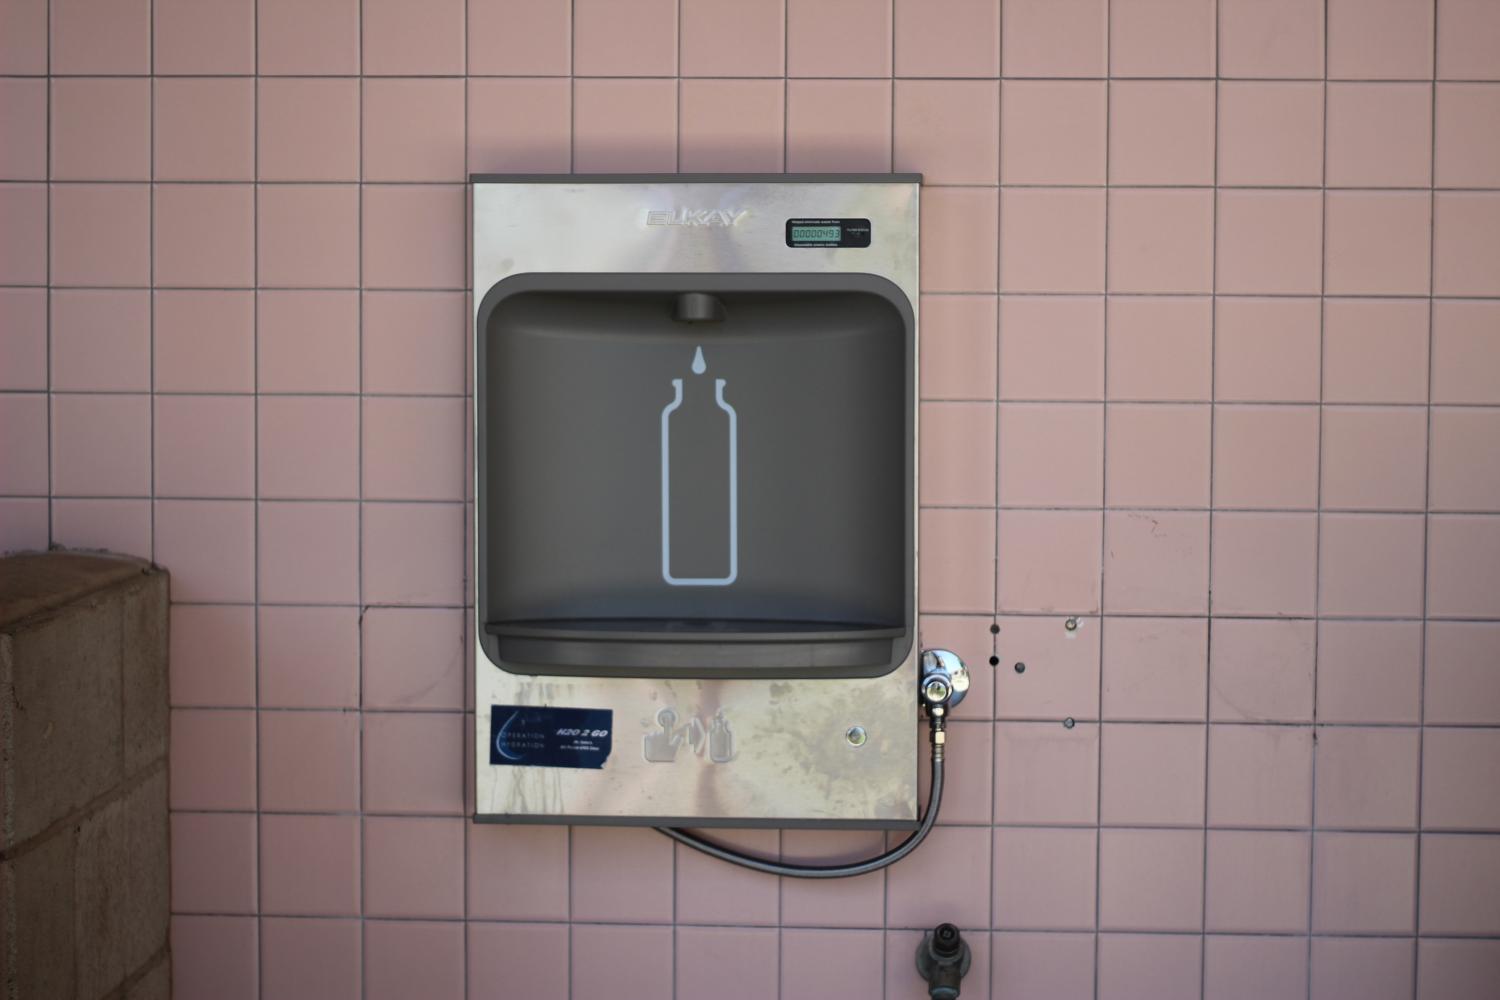 The water dispenser was created with a goal of reducing plastic waste.